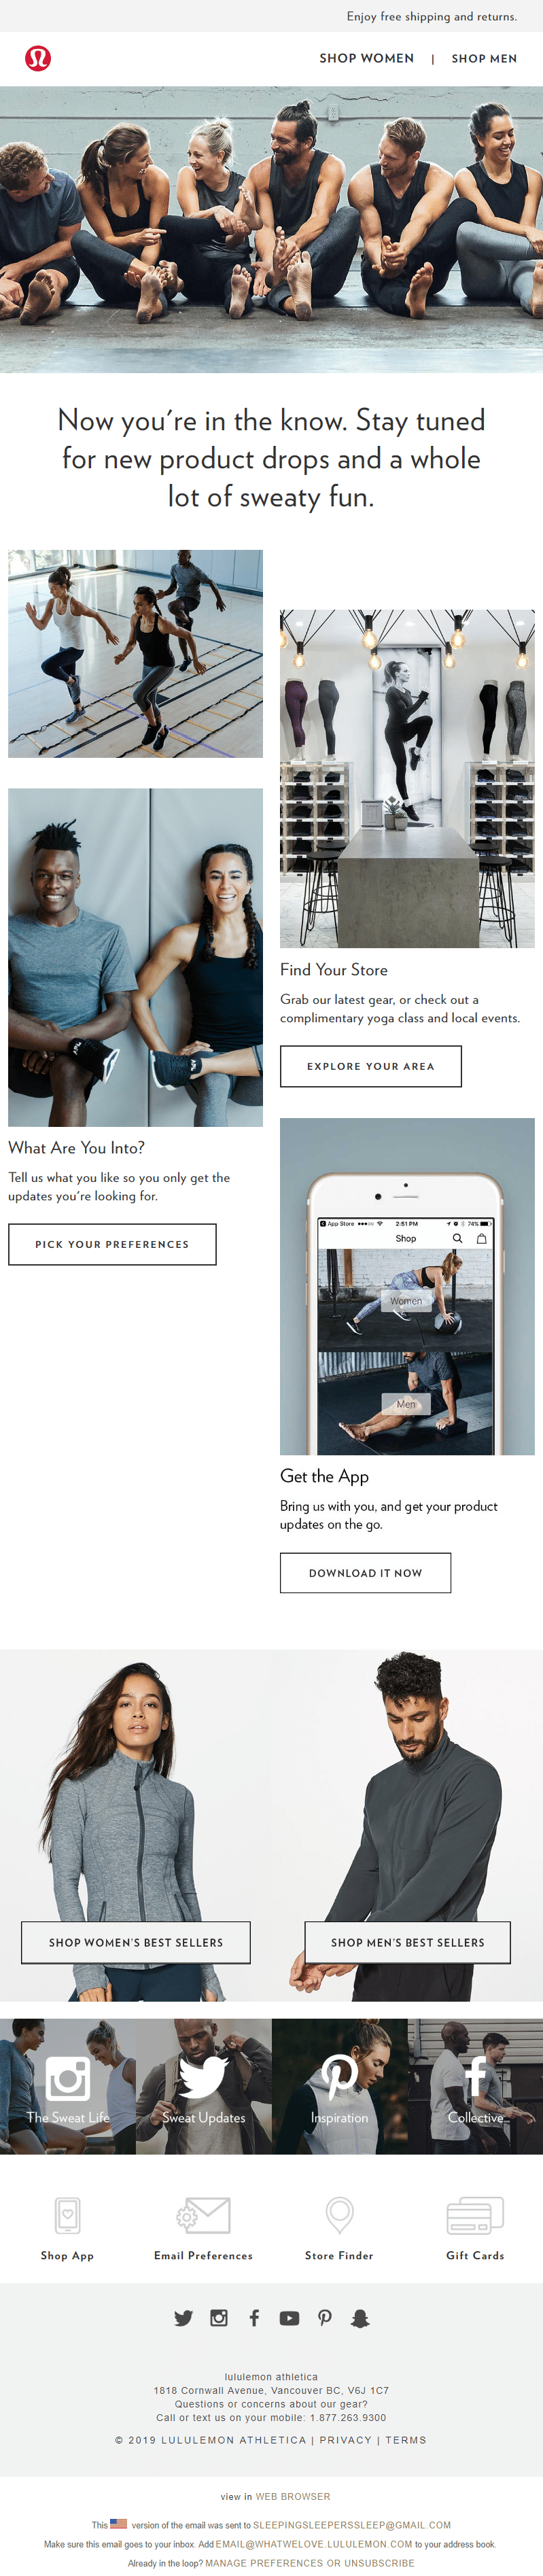 triggered email best practices. a welcome series from lululemon.